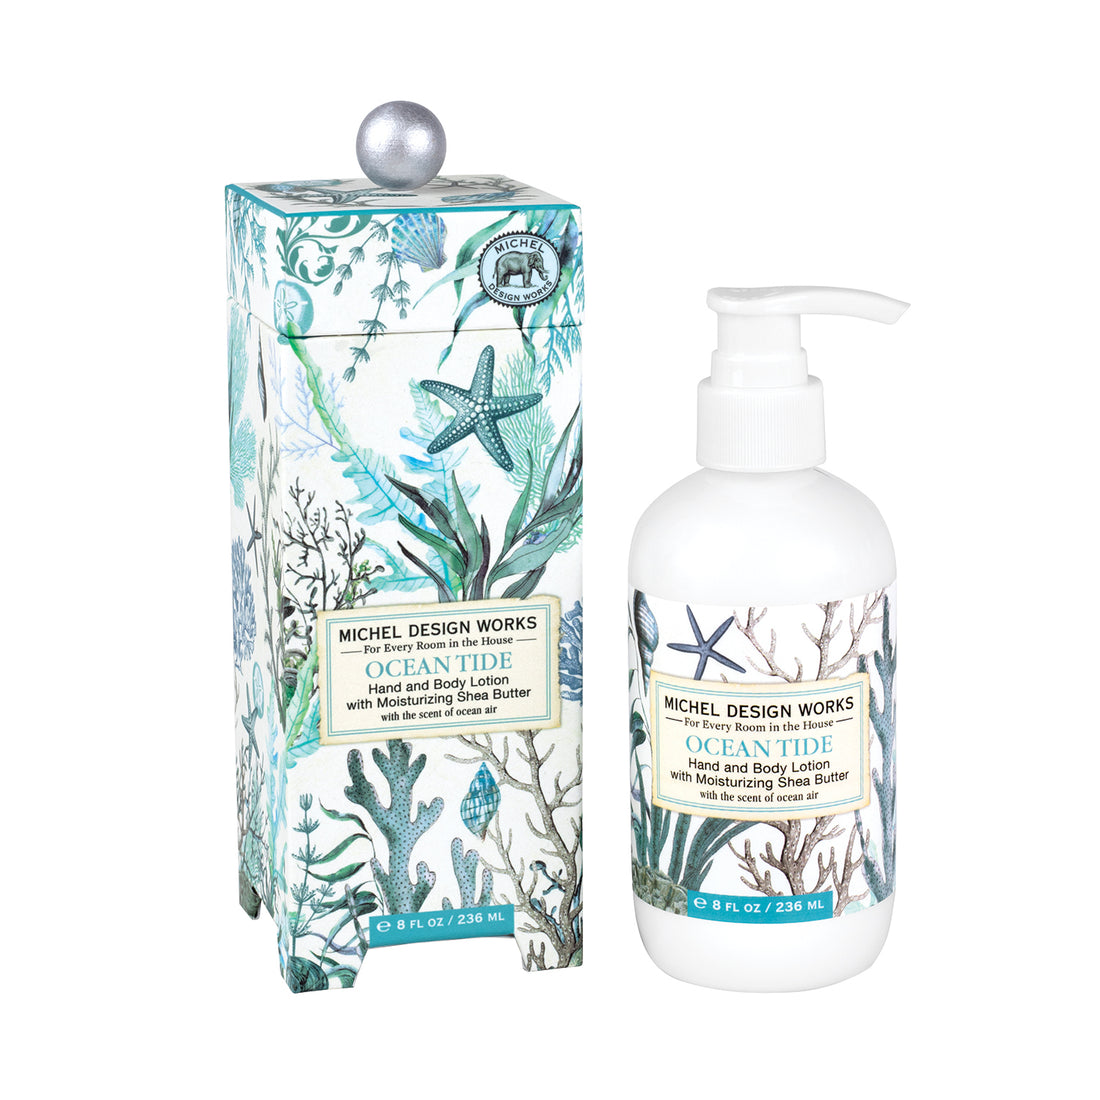 Michel Design Works - Ocean Tide  (Hand and Body Lotion)